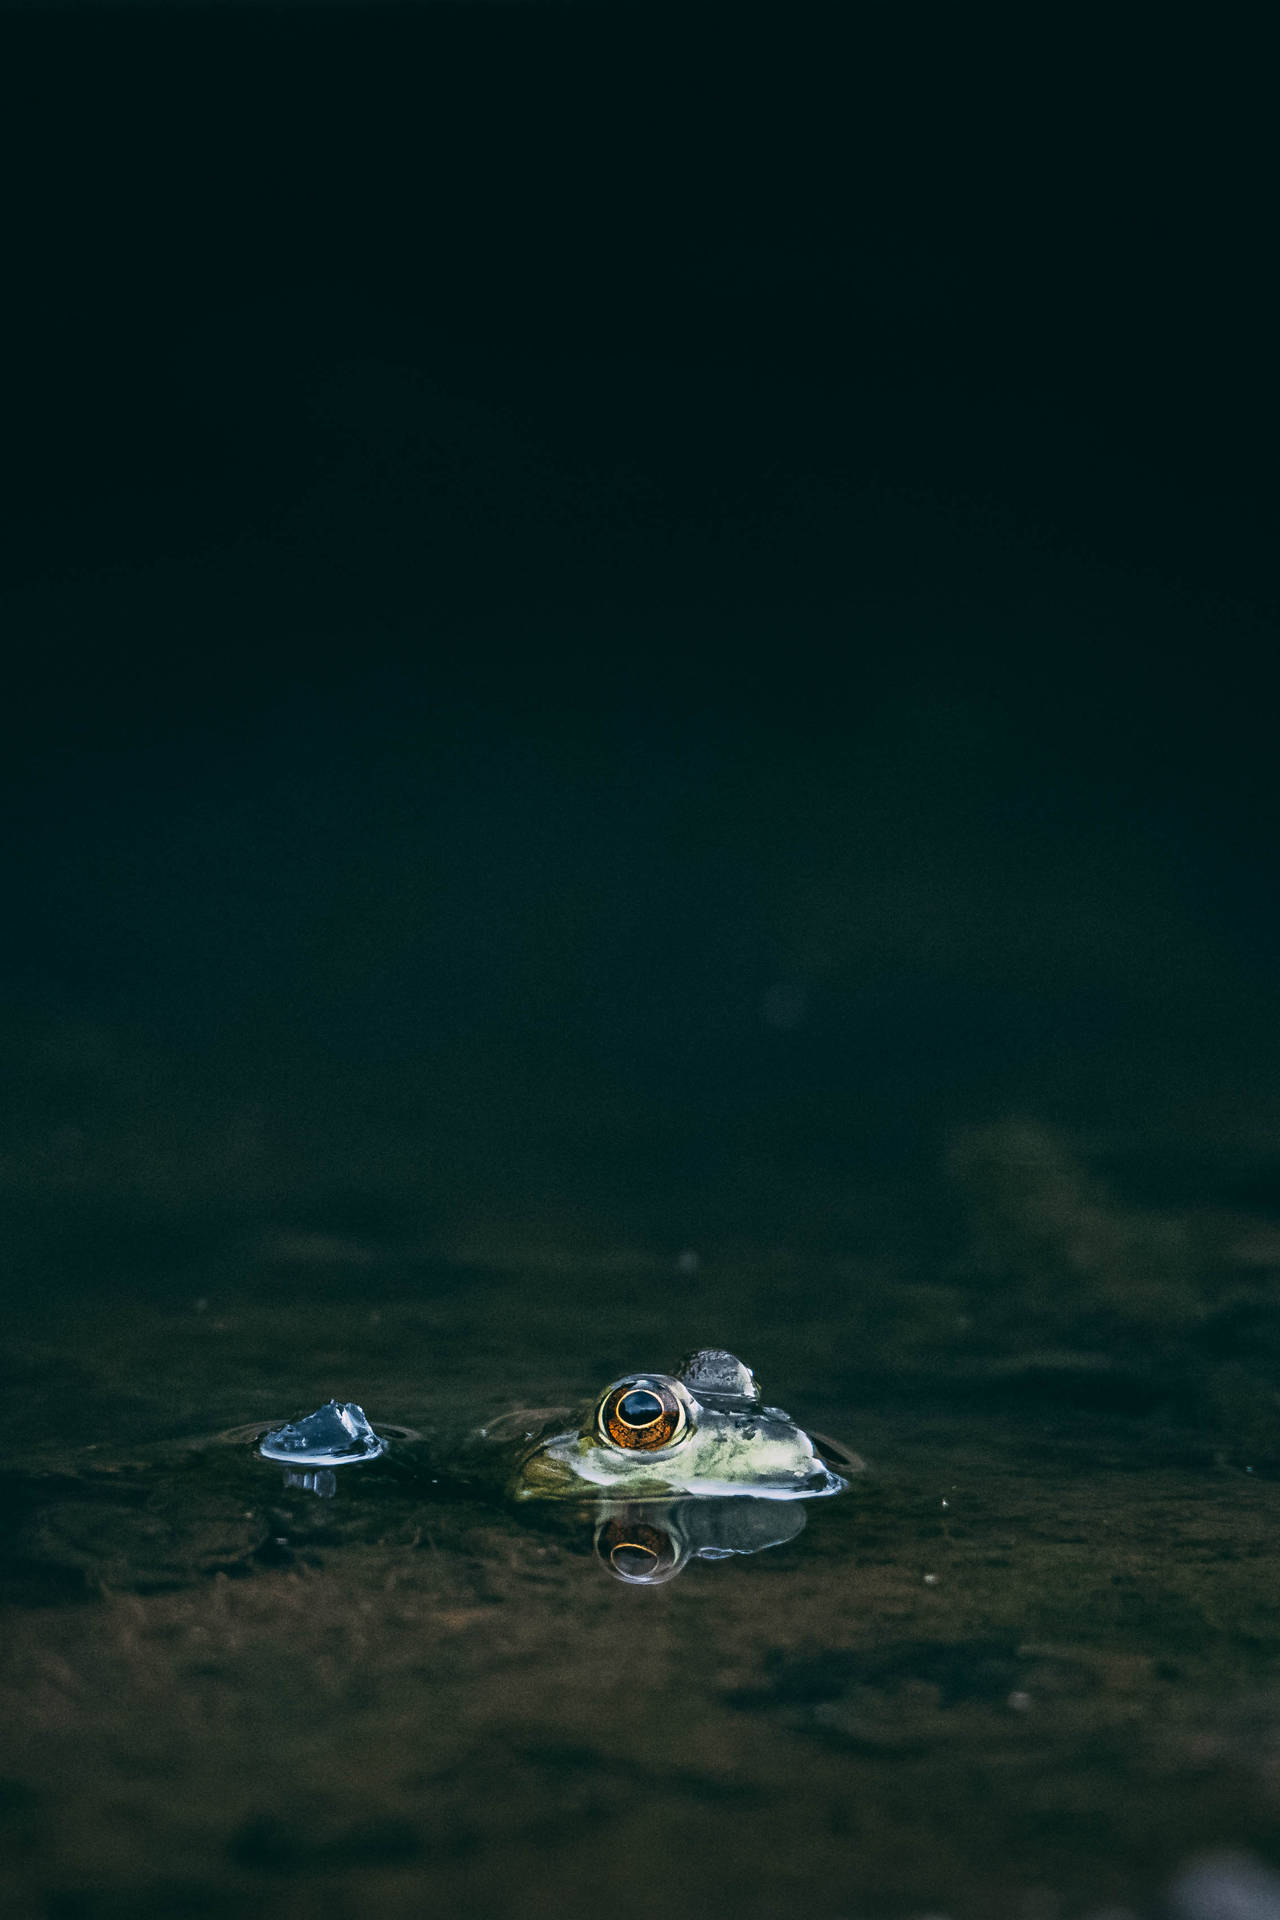 Frog 2271X3407 Wallpaper and Background Image